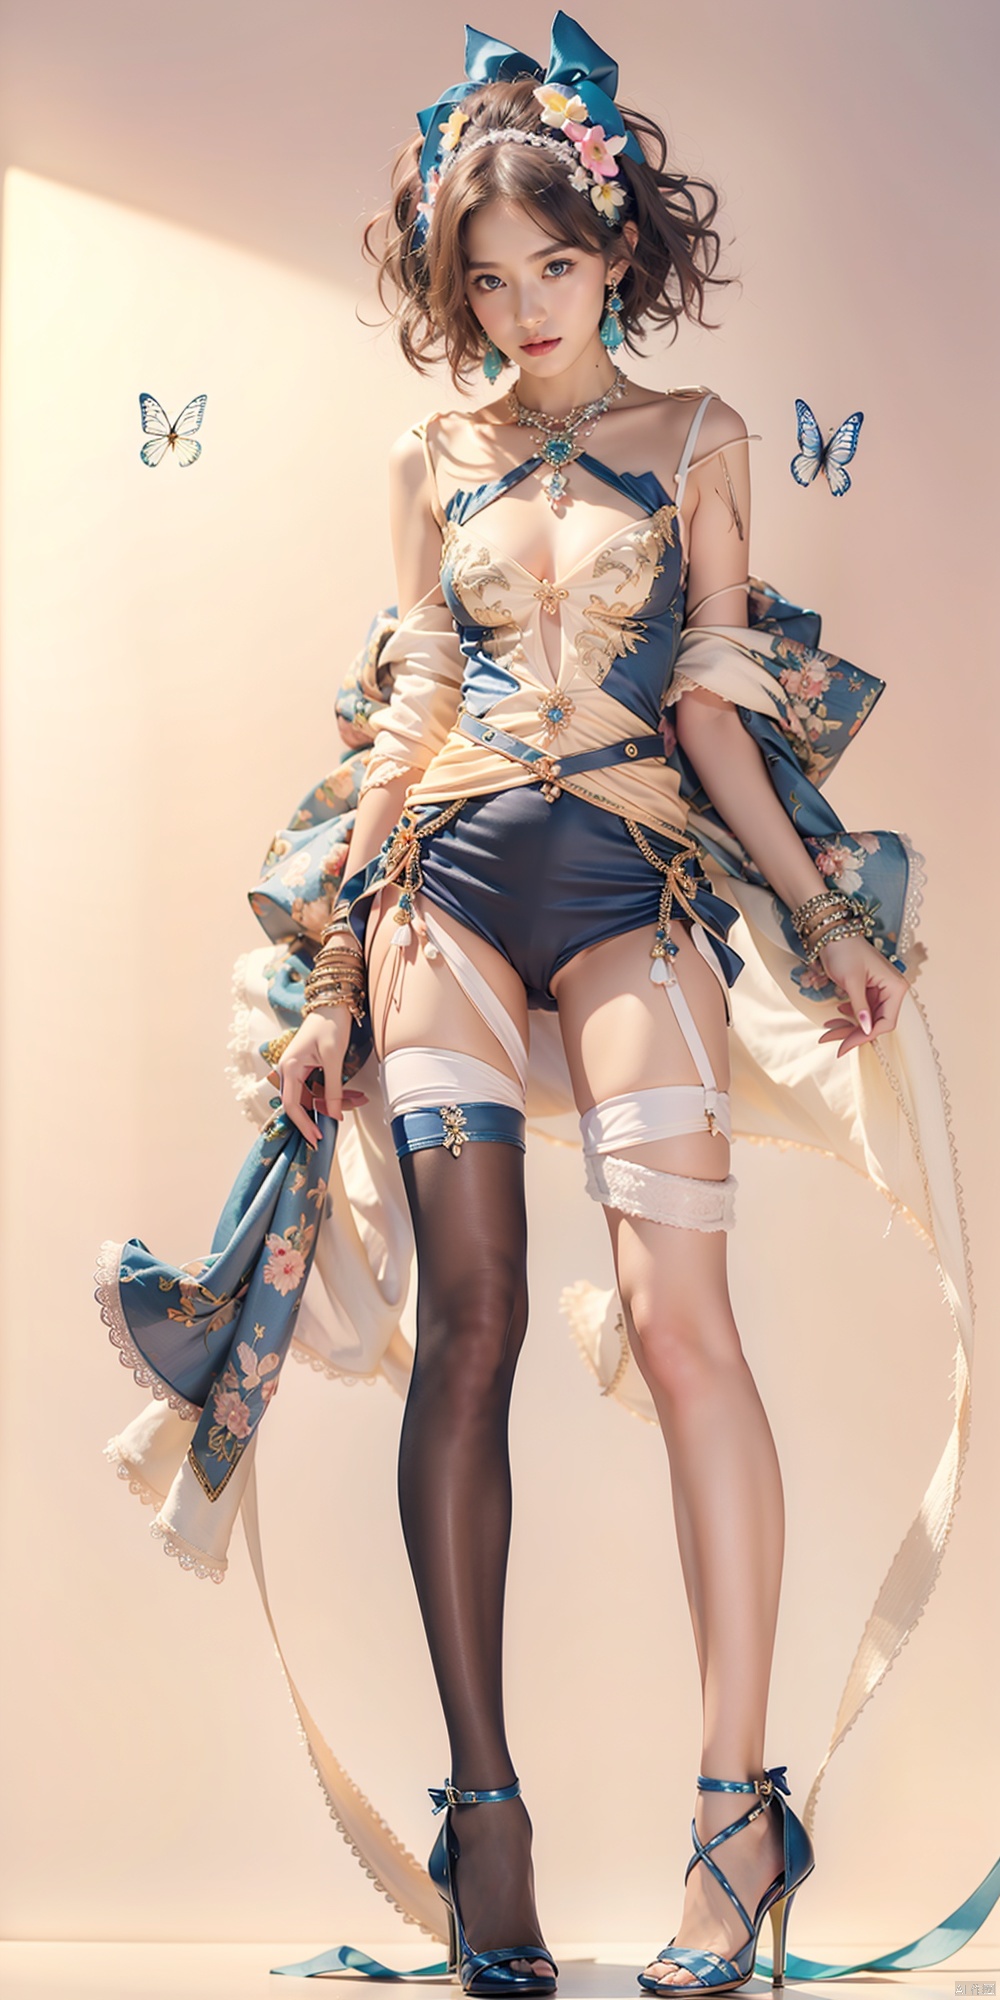  ((nsfw)),nude,1 Girl ,Full Body ,bare legs, long hair ,Black Eyes ,Blue Gemstone Earrings ,Necklace ,Bracelet ,Bare Shoulders ,Dresses ,Floating Skirt ,Ribbon Pantyhose ,Black Pantyhose,High Heels, (Dynamic Pose: 1.2), Ray Tracing ,Gradient Background, Pastel Colors ,Blue ,Red ,Background Text ,(Magazine Cover) ,RAW Photo, (Film Grare: 1.2) ,Masterpiece ,High Resolution, HM, 1 Girl